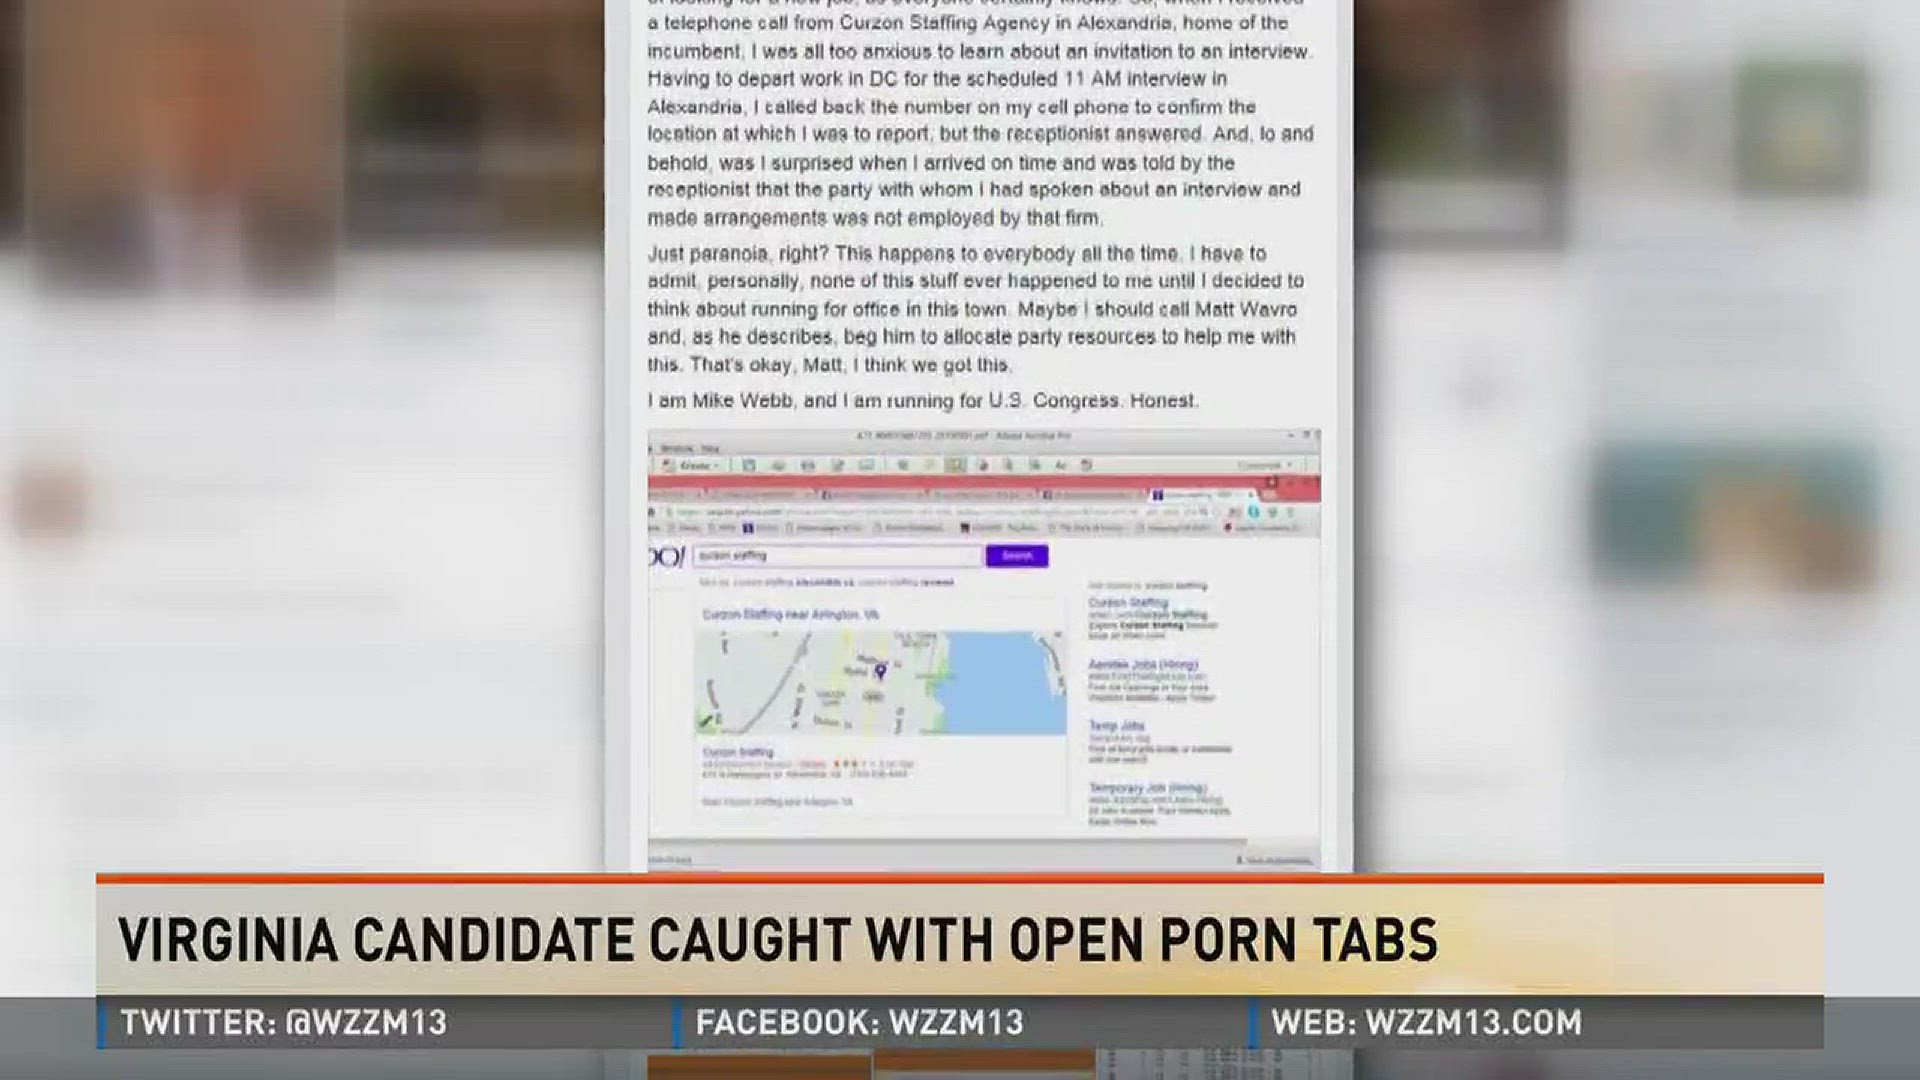 Free Beer and Hot Wings Congressional candidate shares porn sites on Facebook wzzm13 photo picture